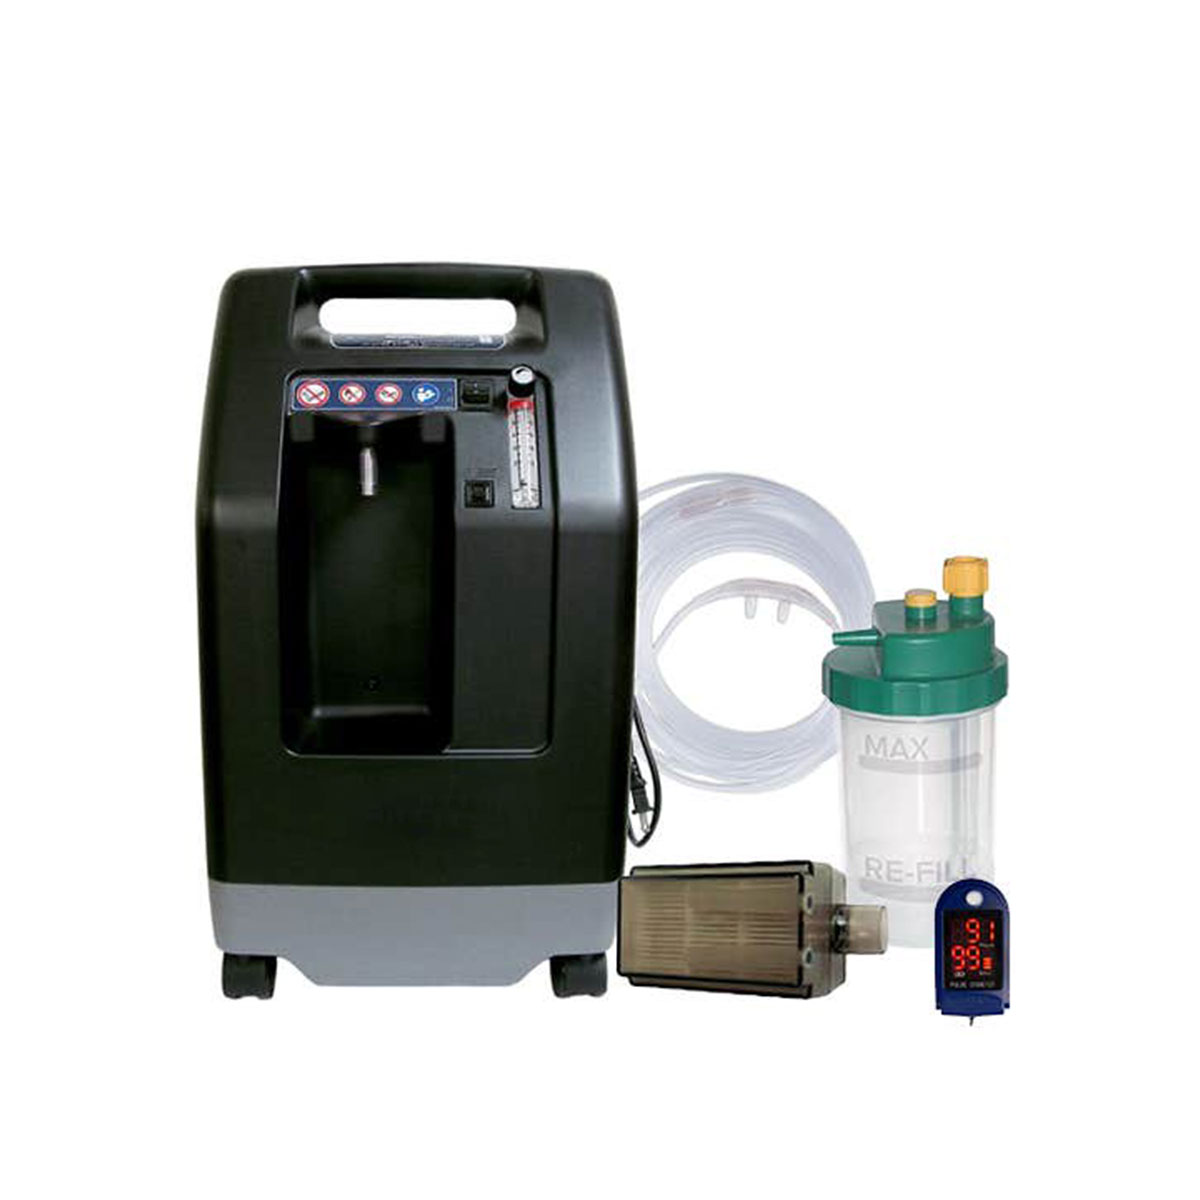 Devilbiss Oxygen Concentrator 5 LPM On Sale Suppliers, Service Provider in Agra